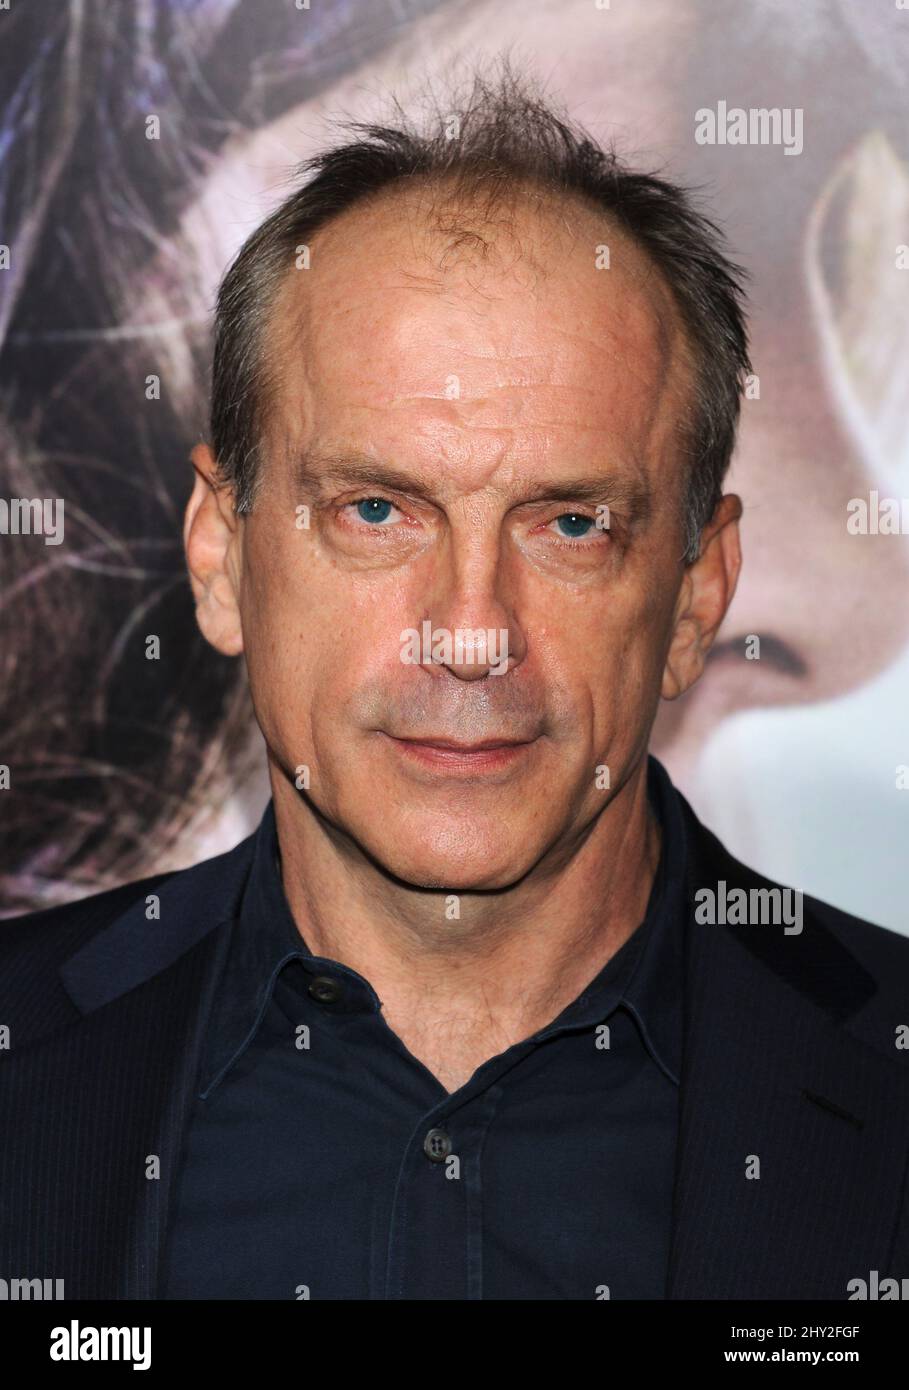 Tomas Arana attending the 'Romeo & Juliet' World Premiere held at the ArcLight Cinemas Hollywood in Los Angeles, USA. Stock Photo